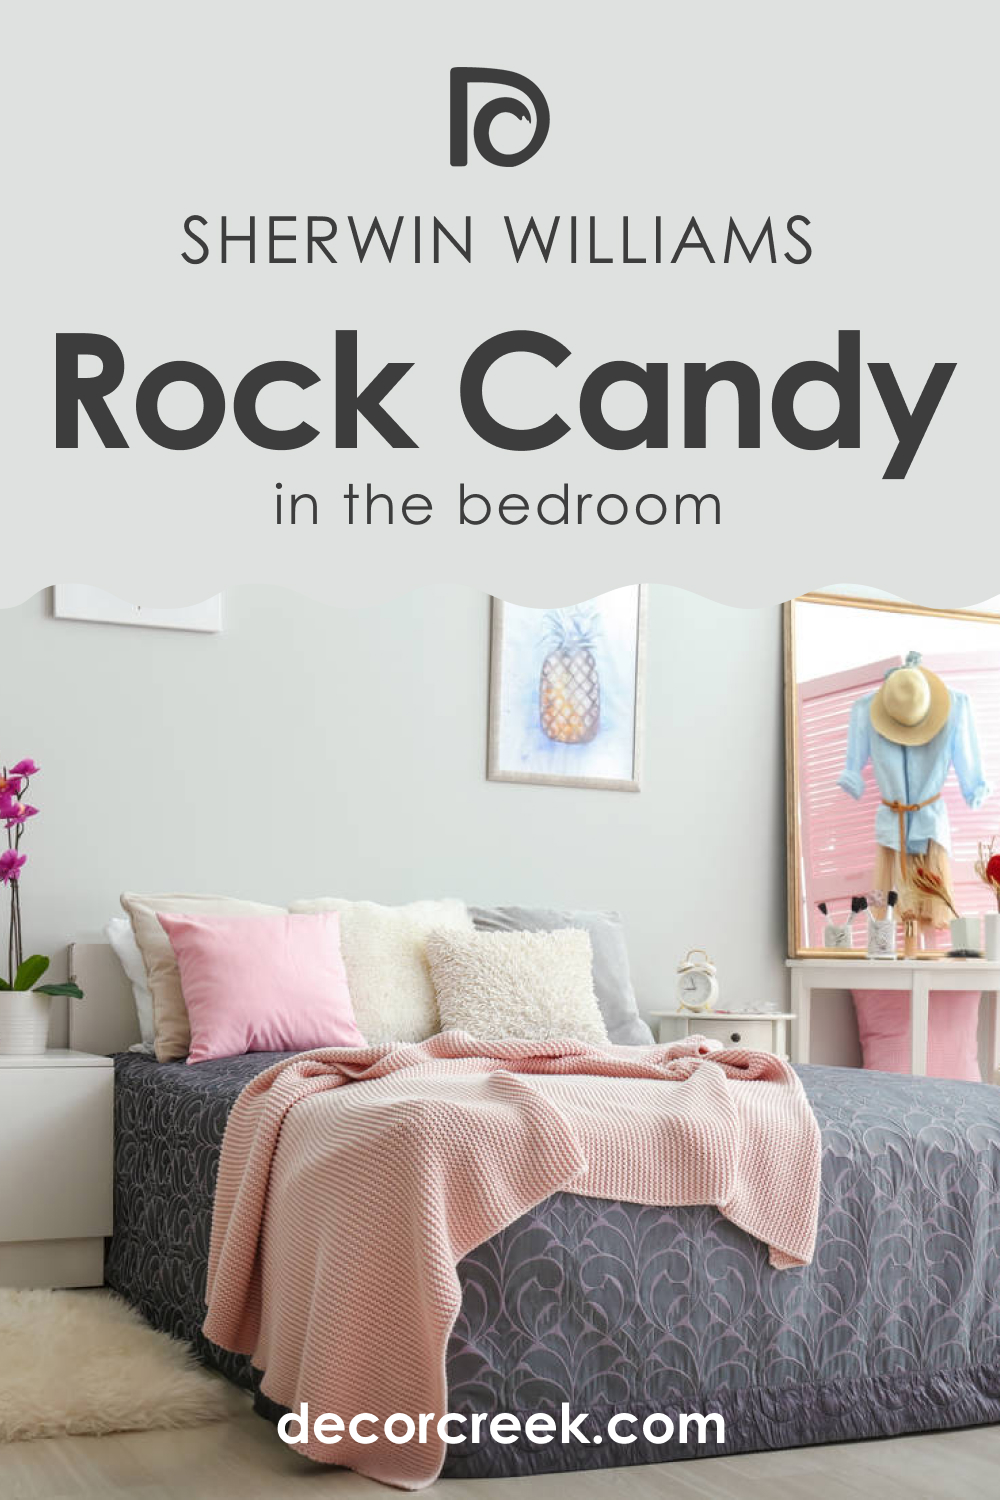 How to Use SW 6231 Rock Candy in the Bedroom?